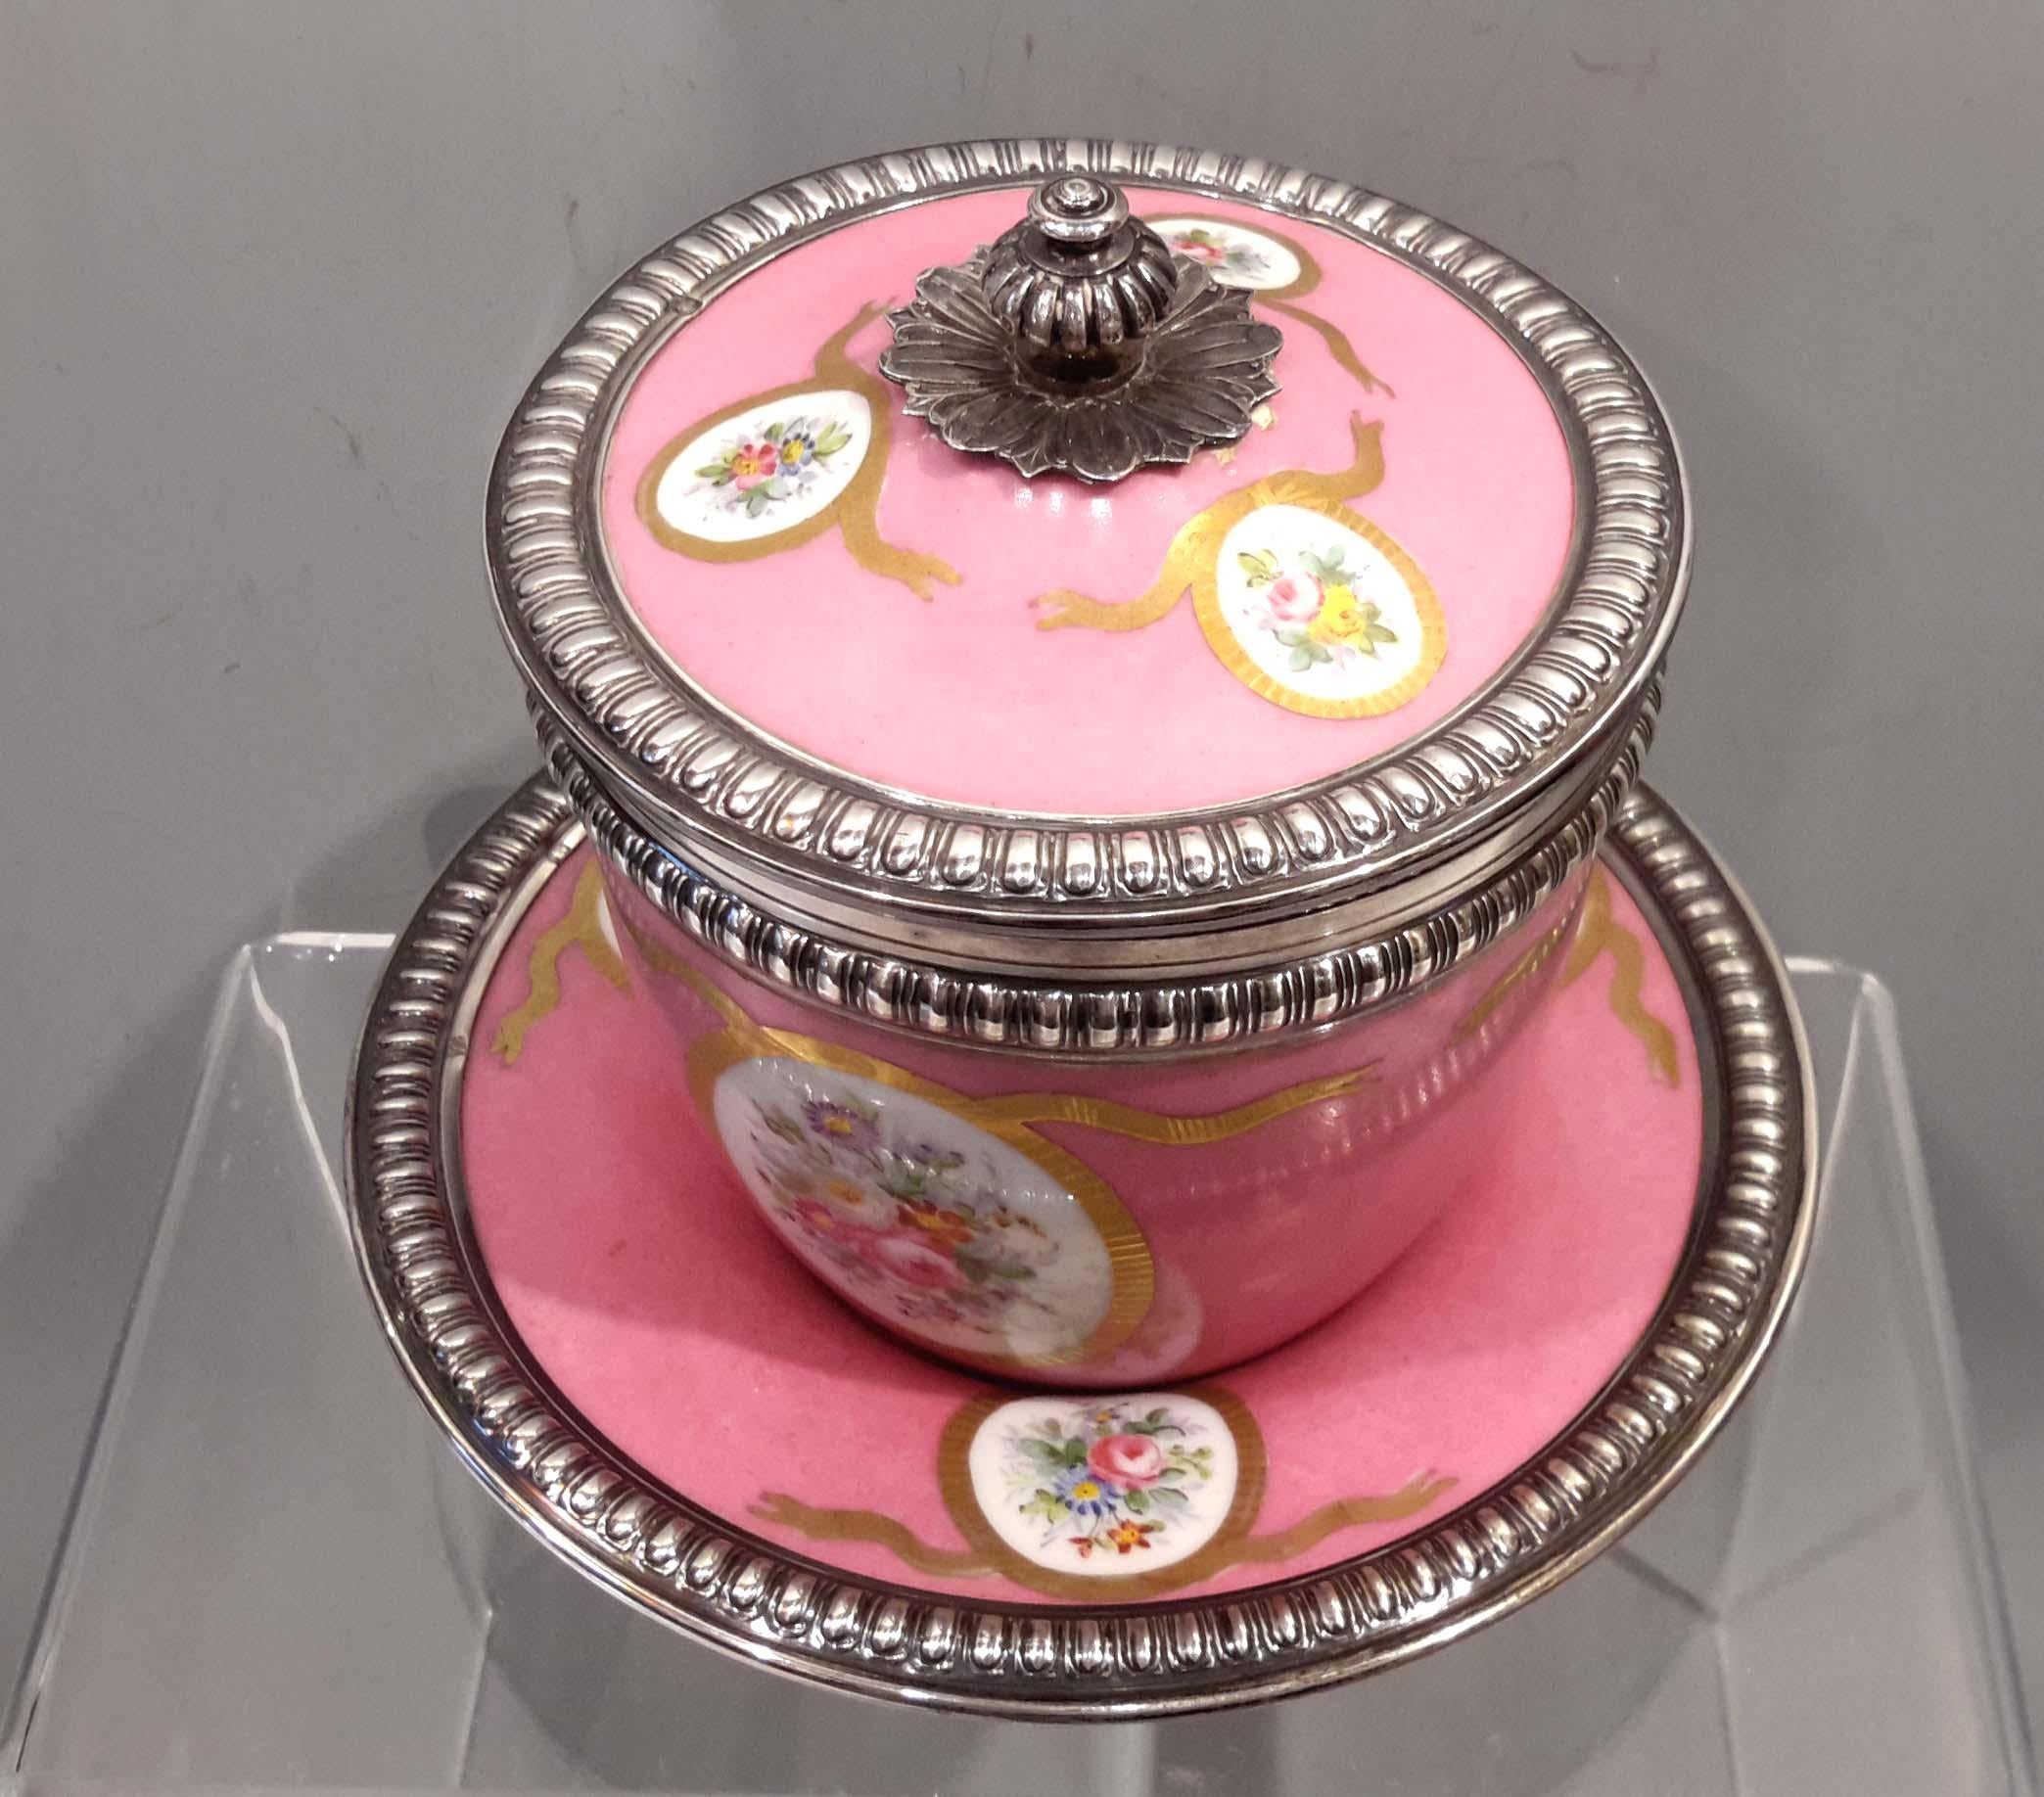 A late 19th century French Sèvres porcelain lidded cup and saucer in pink with floral cartouches and sterling silver mounts. The sterling rims are hallmarked 950 silver with the hallmark of Henri Lapeyre.